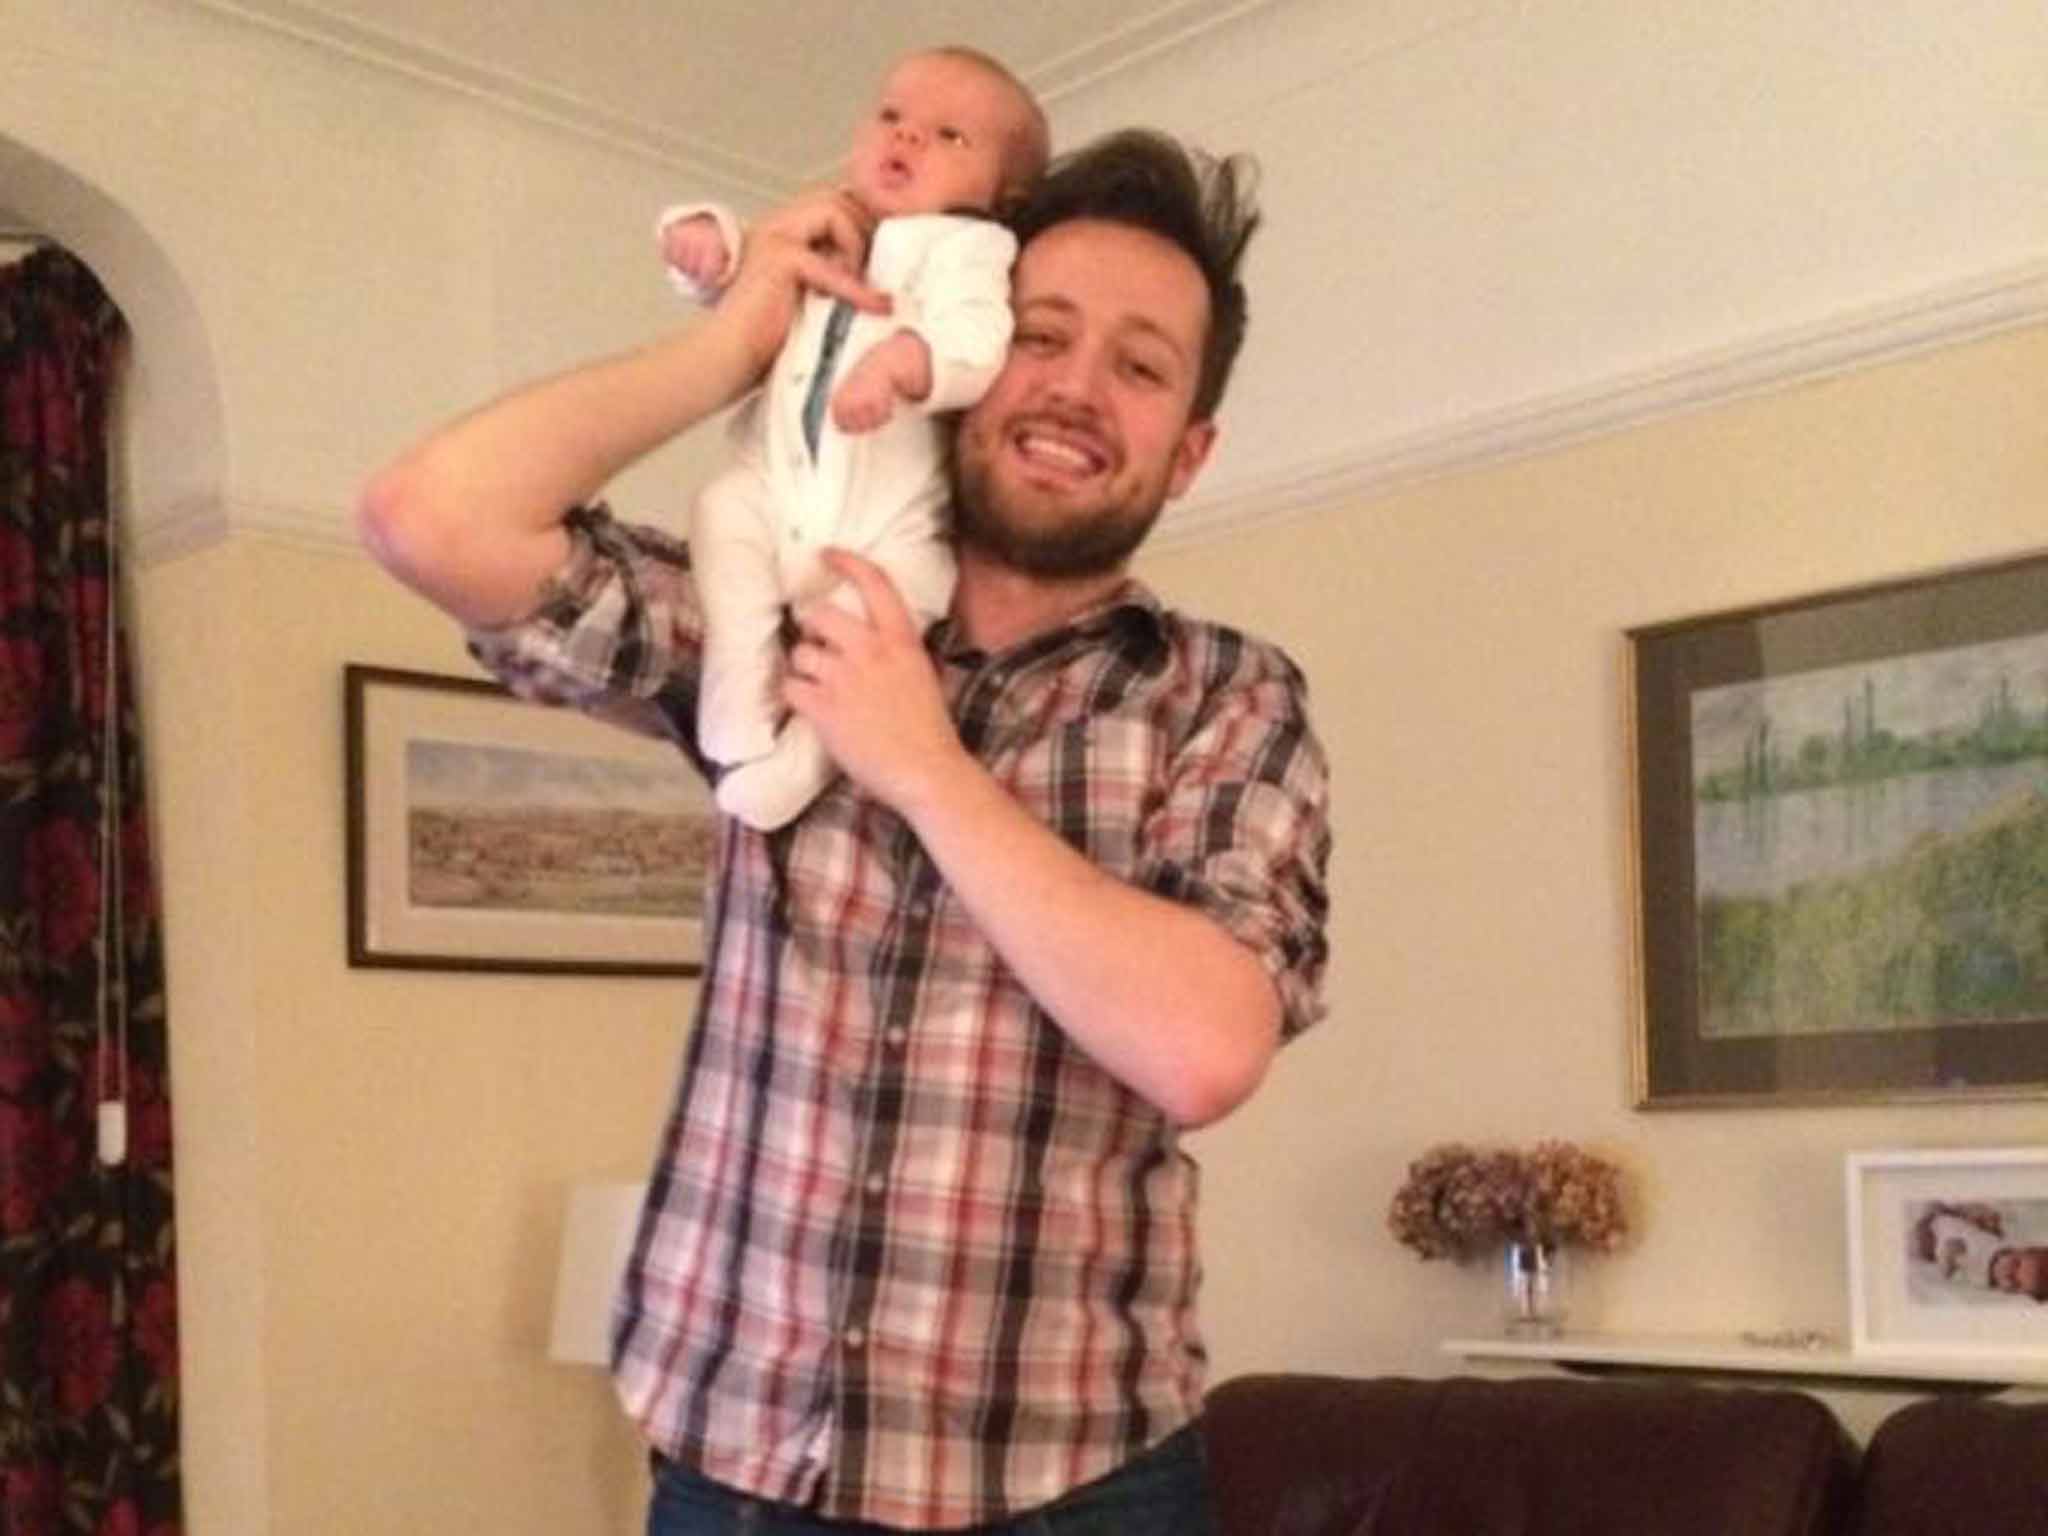 Baby bond: writer Will Dean at home with his newborn baby, Johnny